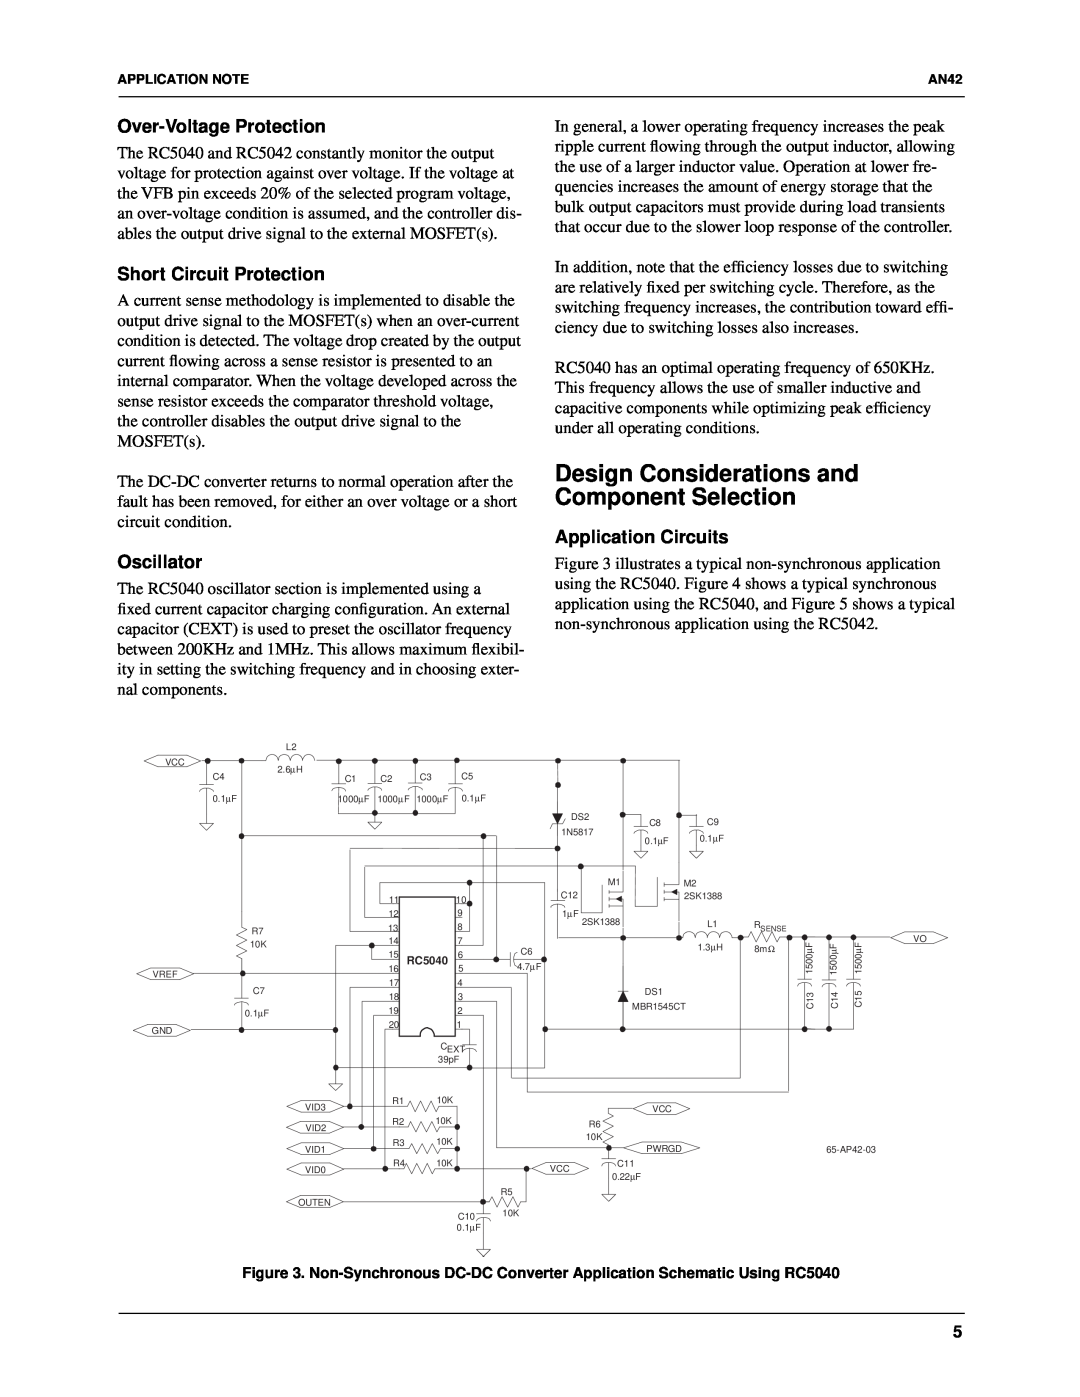 Fairchild RC5040, RC5042 Design Considerations and Component Selection, Over-Voltage Protection, Short Circuit Protection 